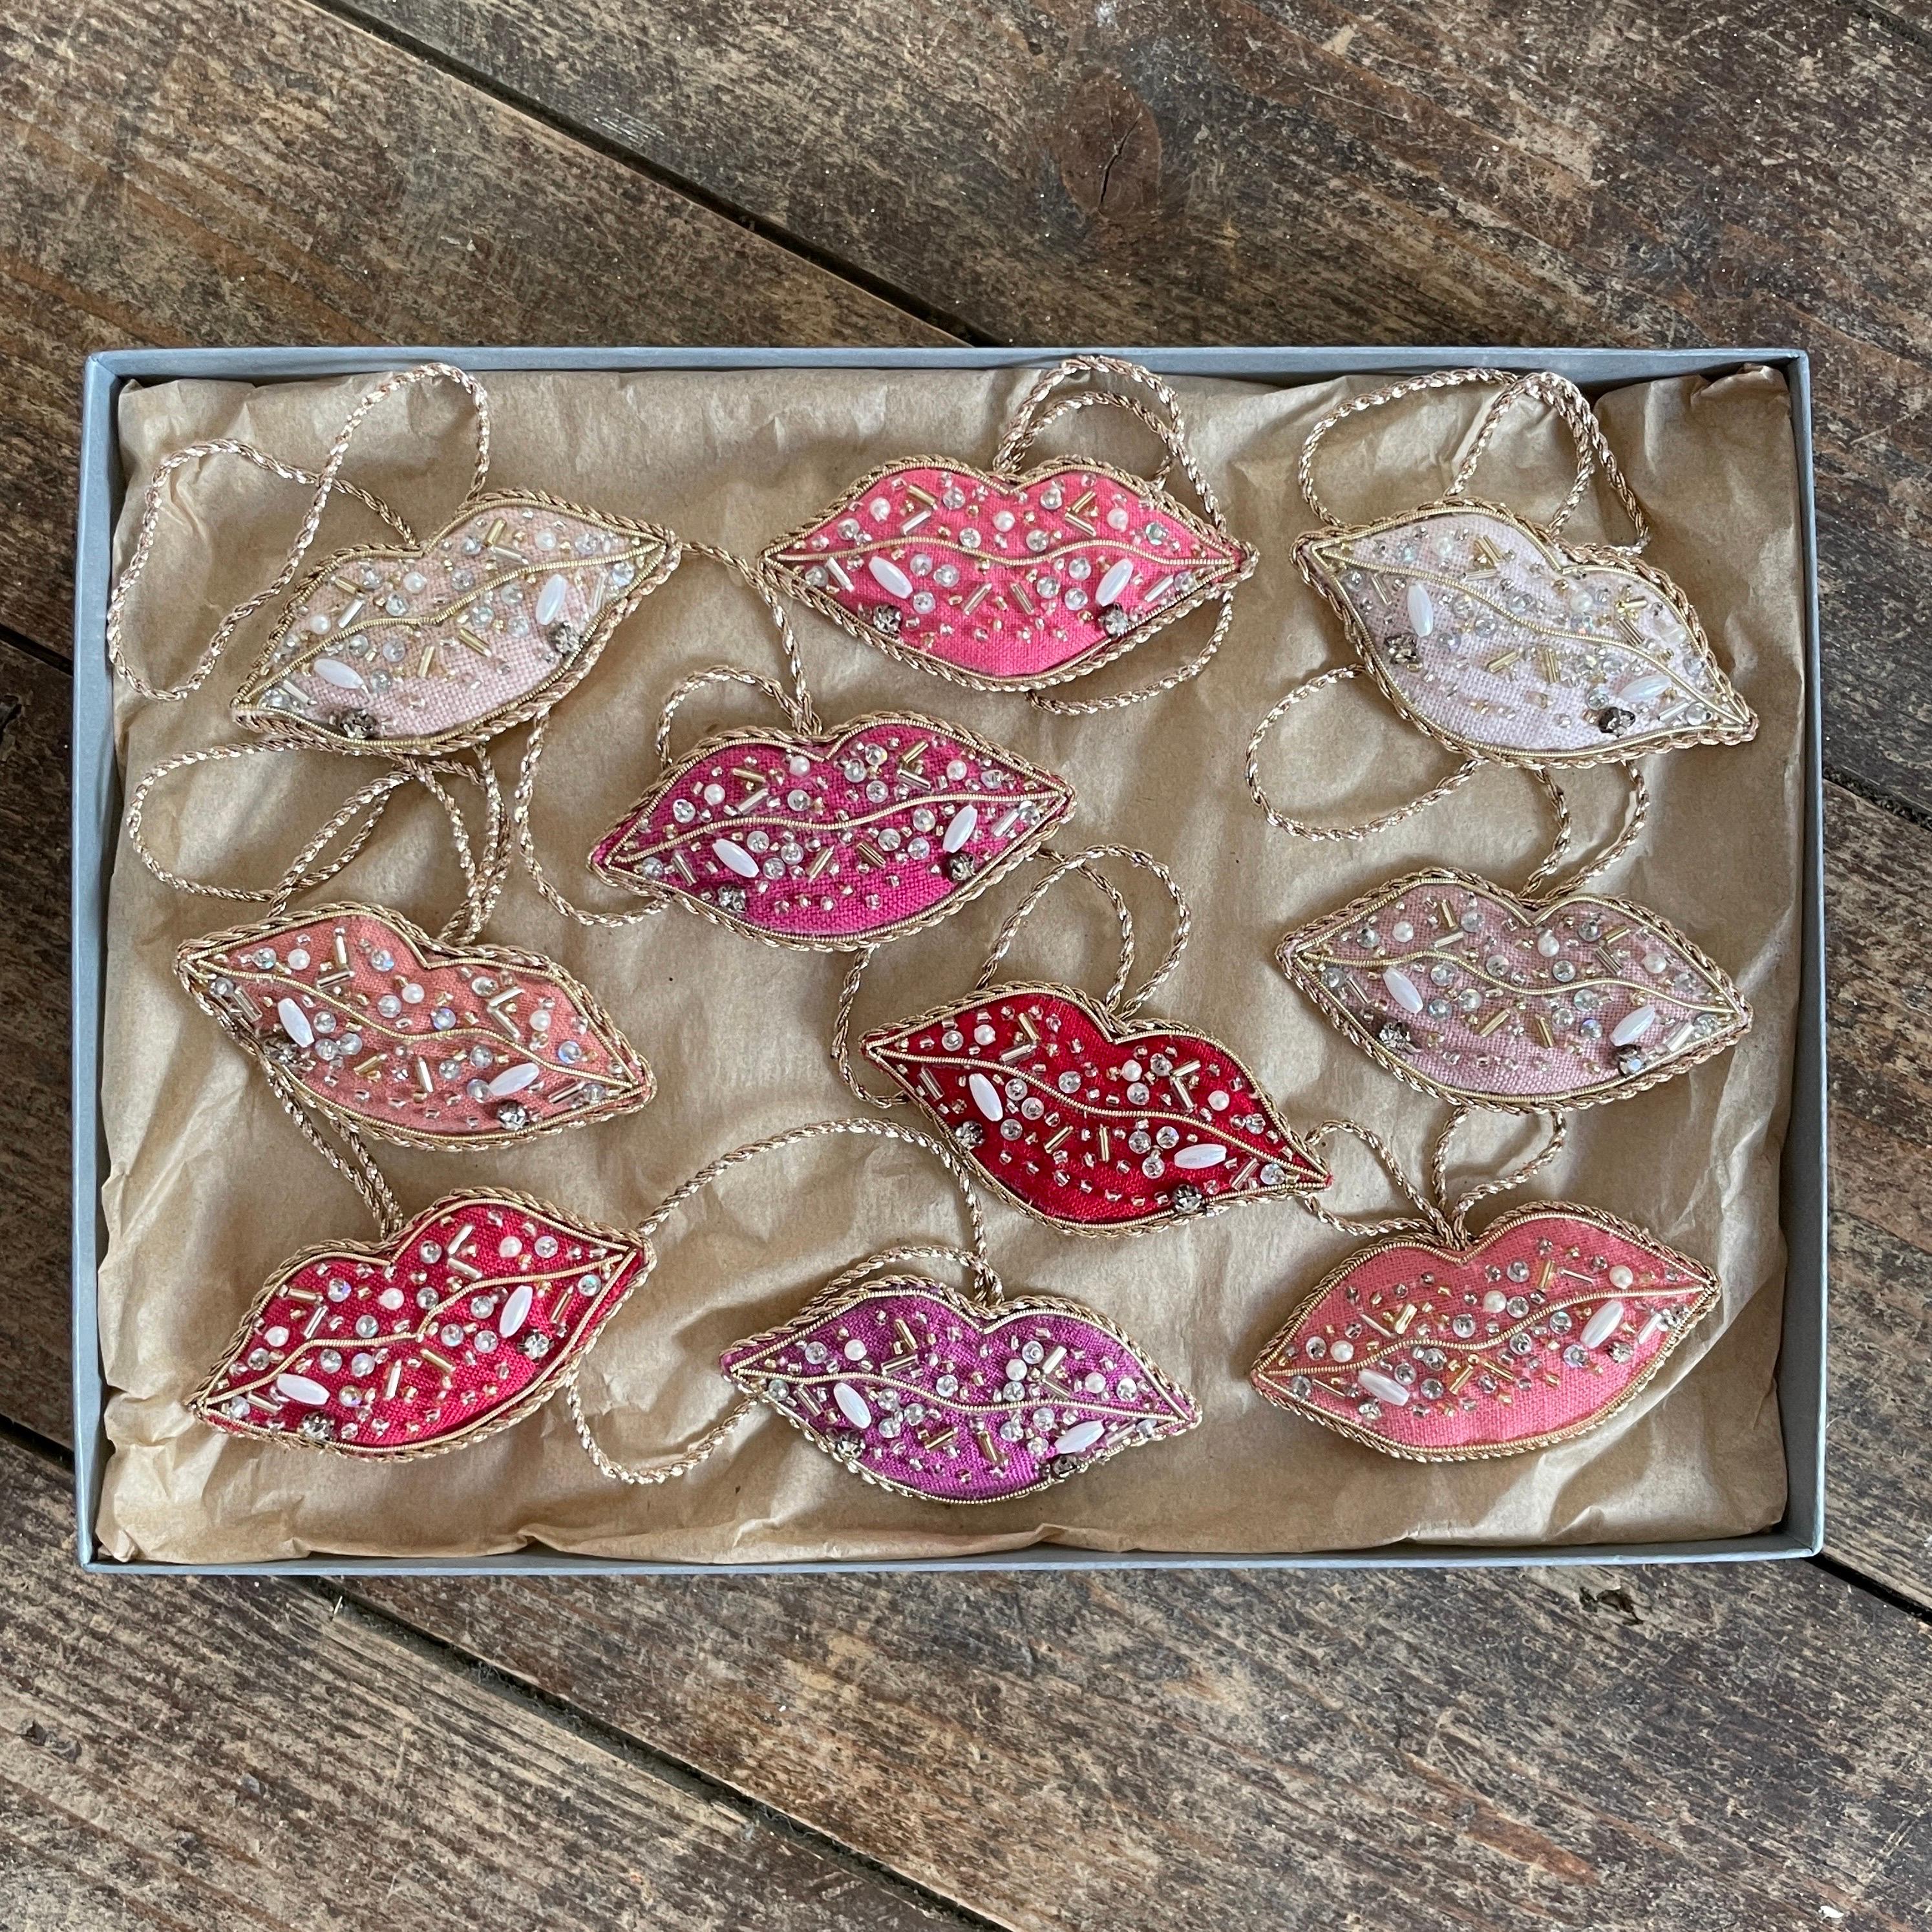 Set of 10 Limited Edition Artisan Irish Linen Lips ornaments in pinks and Valentine’s day reds by Katie Larmour

This is a luxury box set of artisan made decorative ornaments created with authentic Irish Linen, exclusive to 1stdibs. They are special